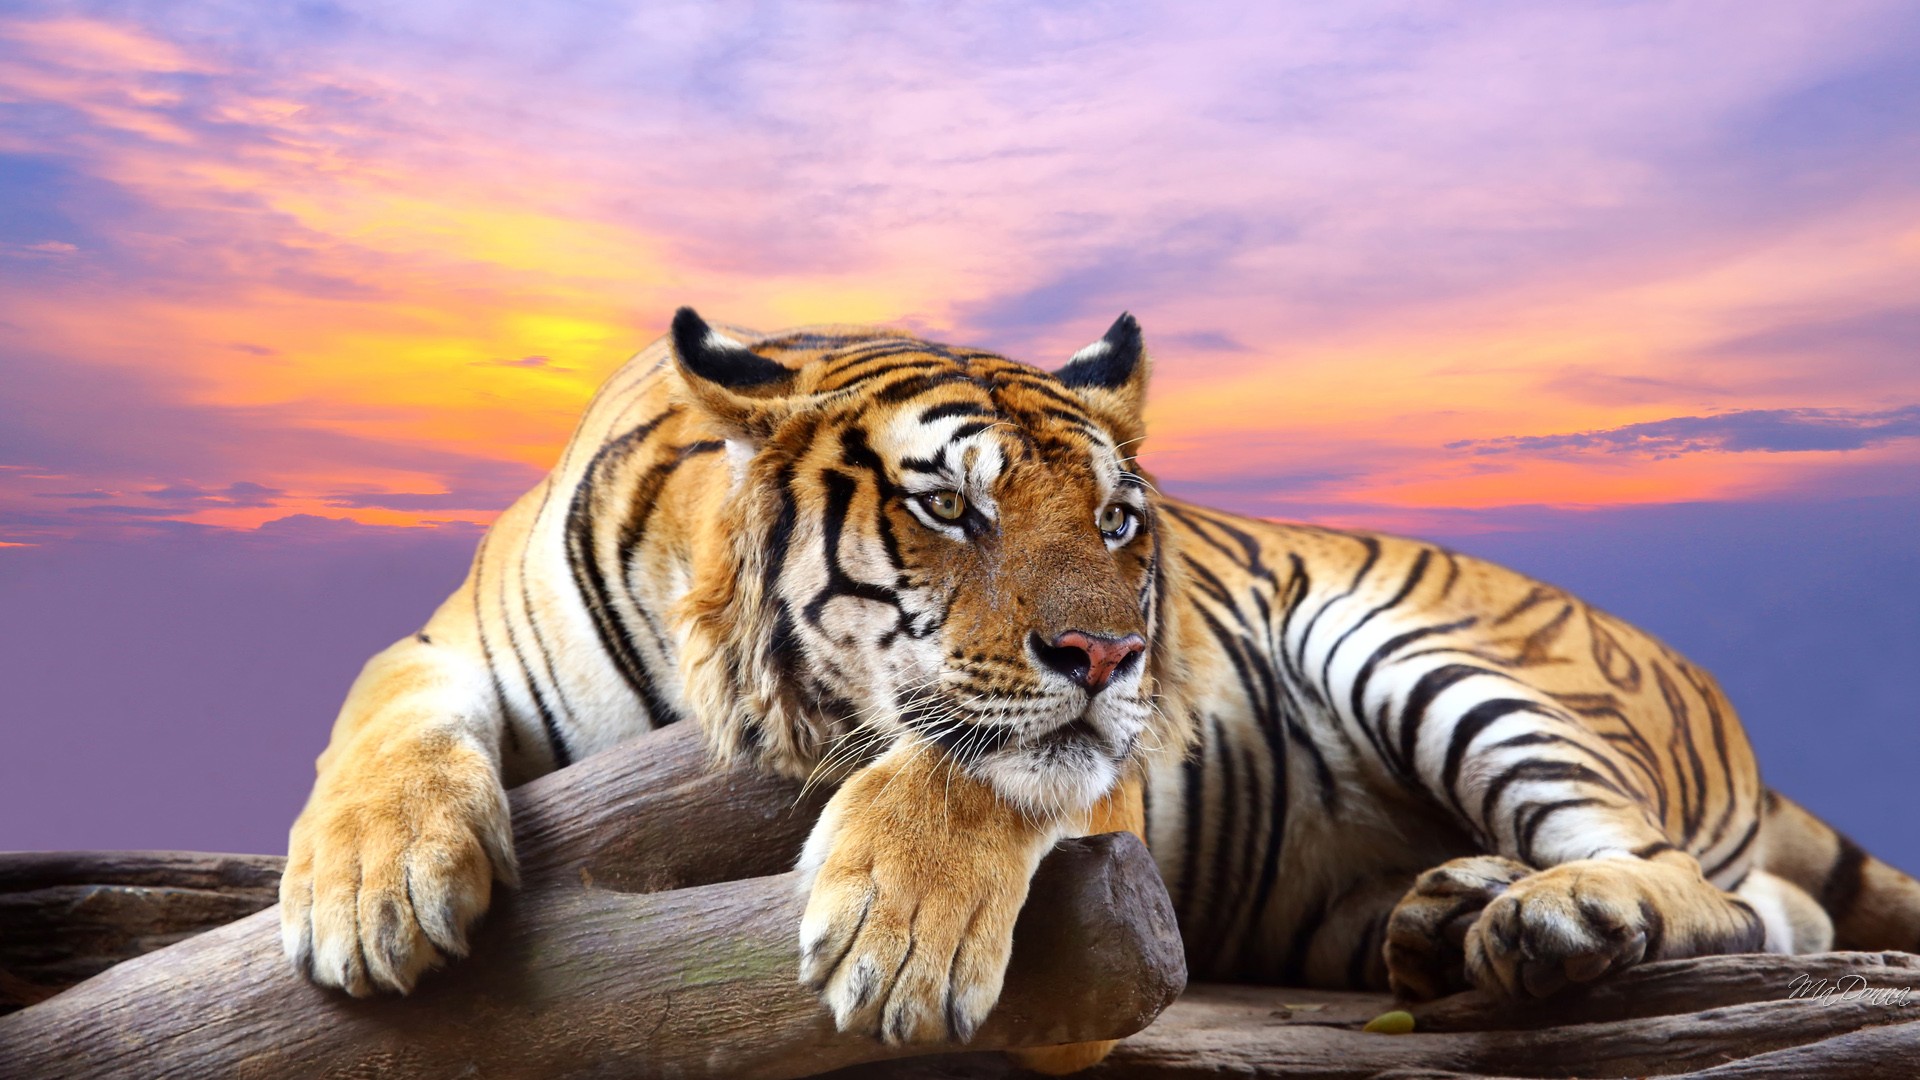 Tiger: The National Animal of India